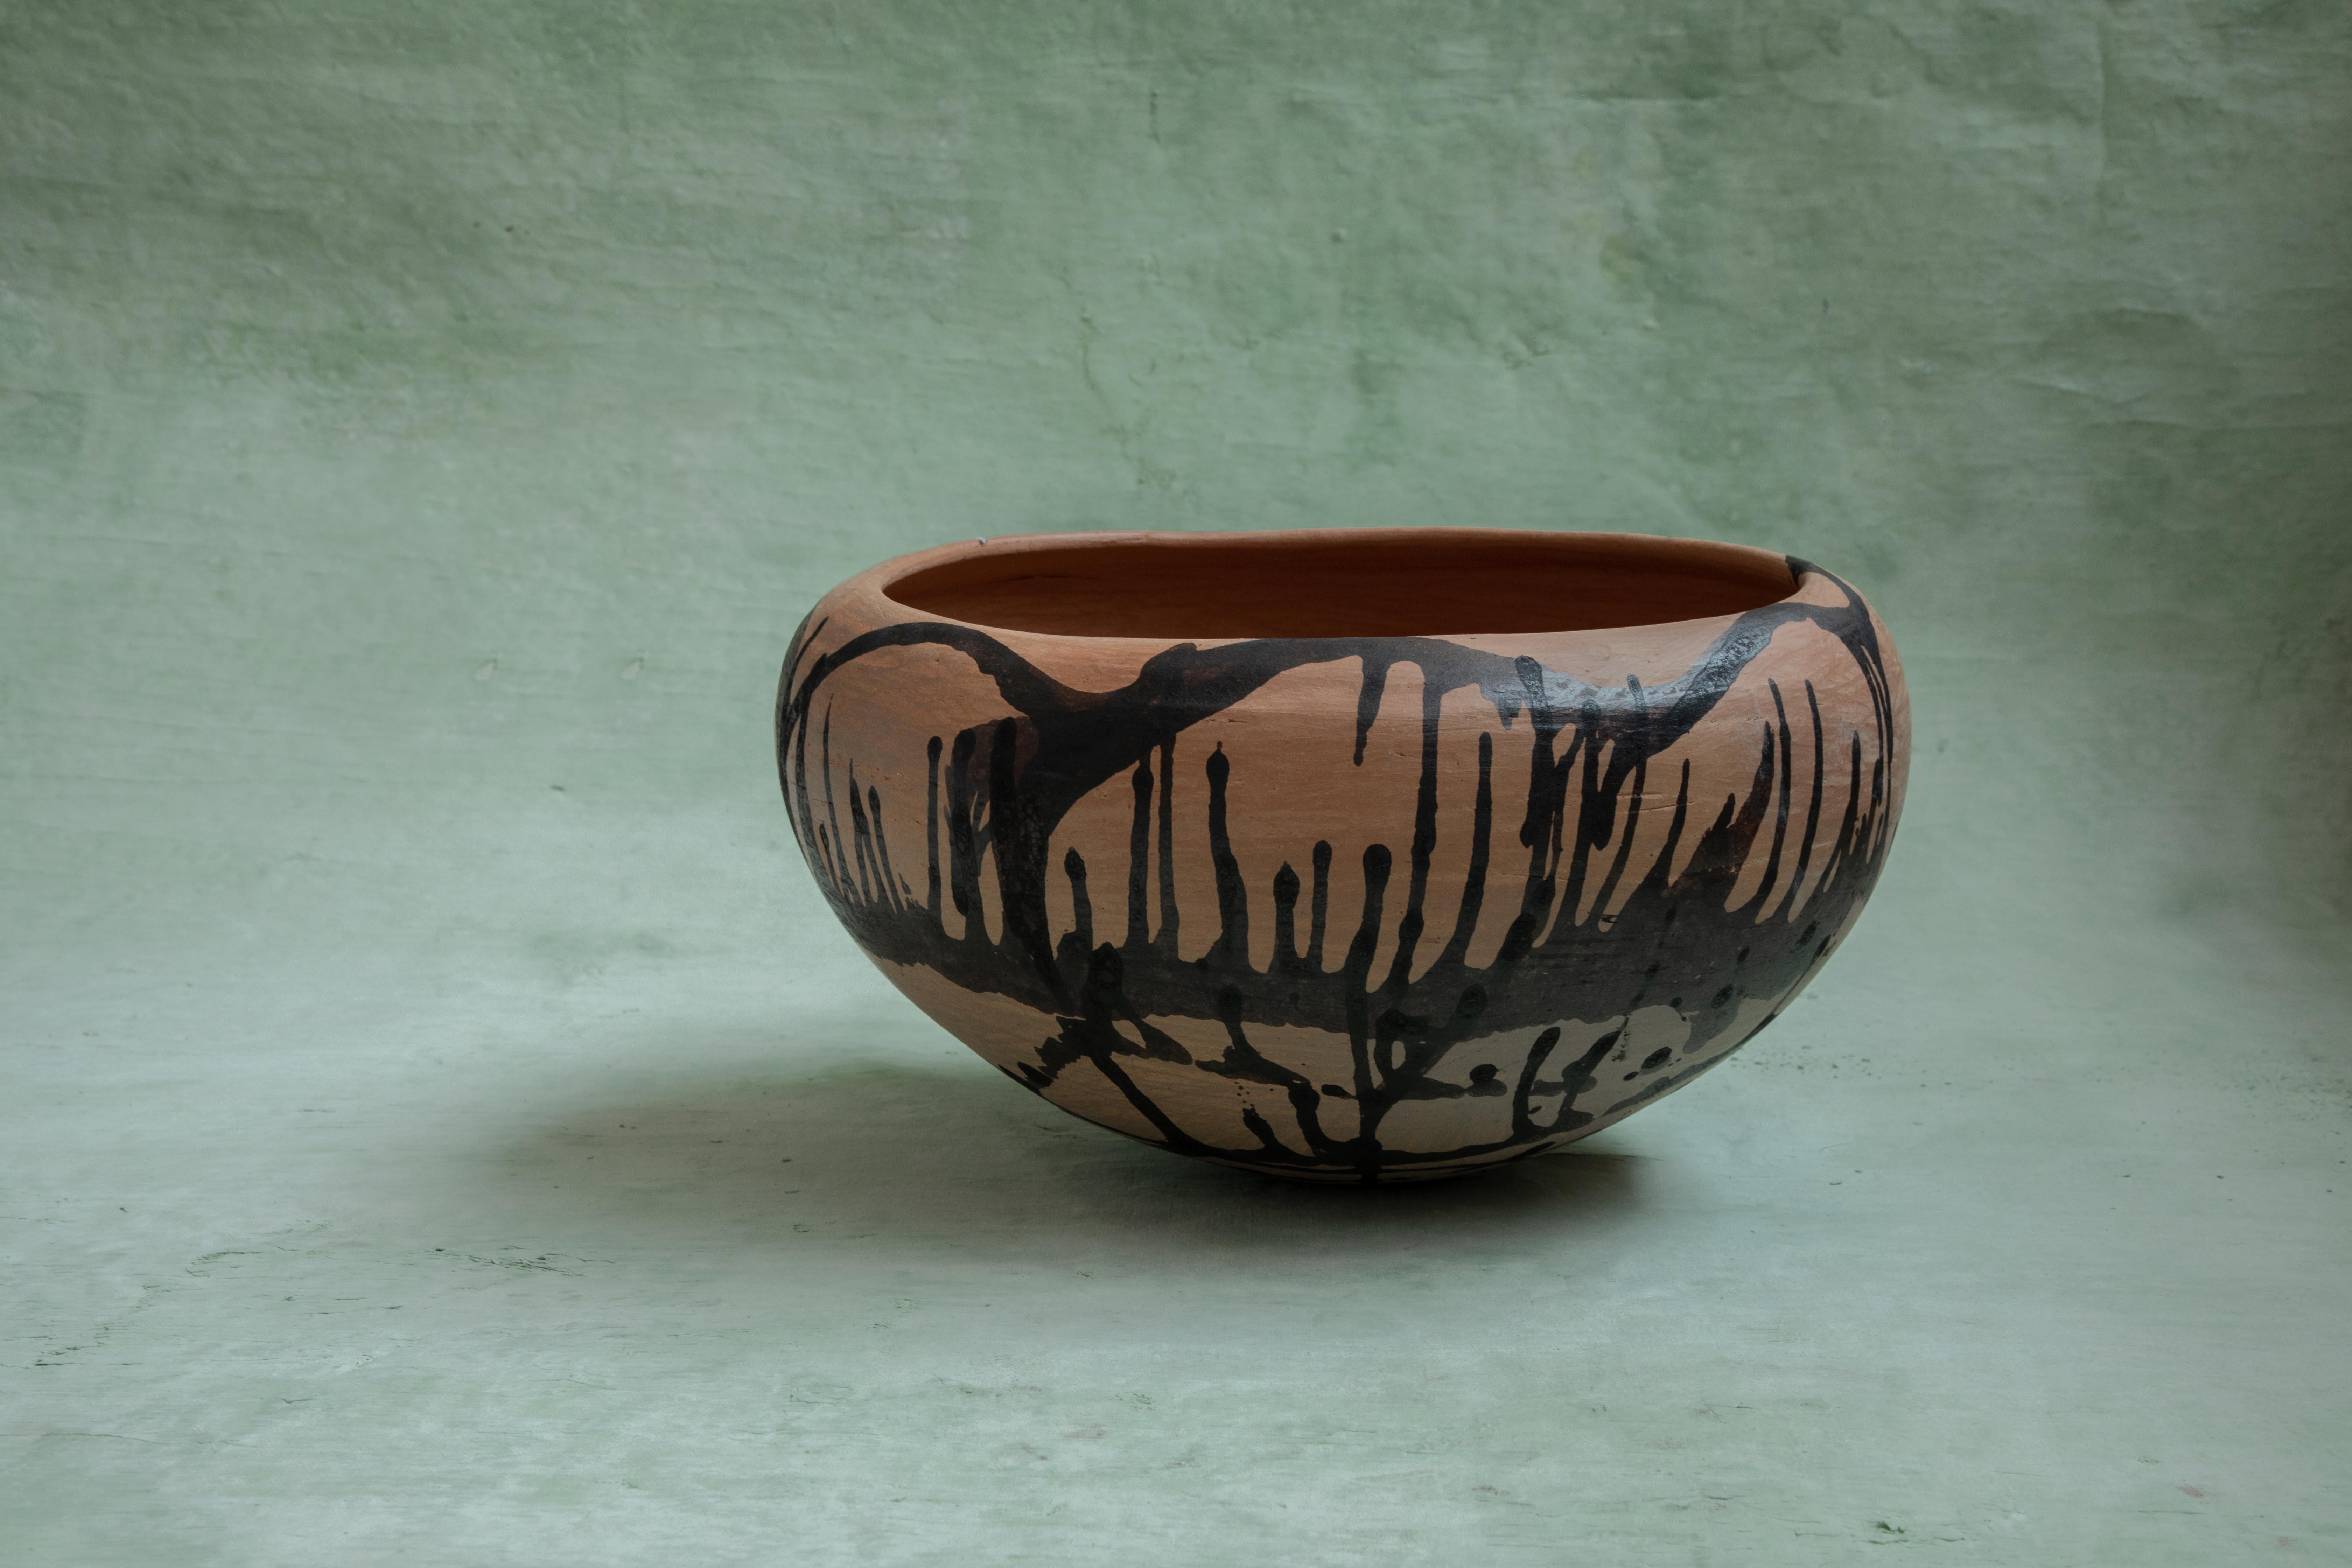 Apaxtle bowl by Onora
Dimensions: D 34 x 18 cm
Materials: Terracotta, splattered pottery with oak bark dye

This collection reinterprets one of the oldest structural techniques in pottery, coiling, the vessels made with this technique are made